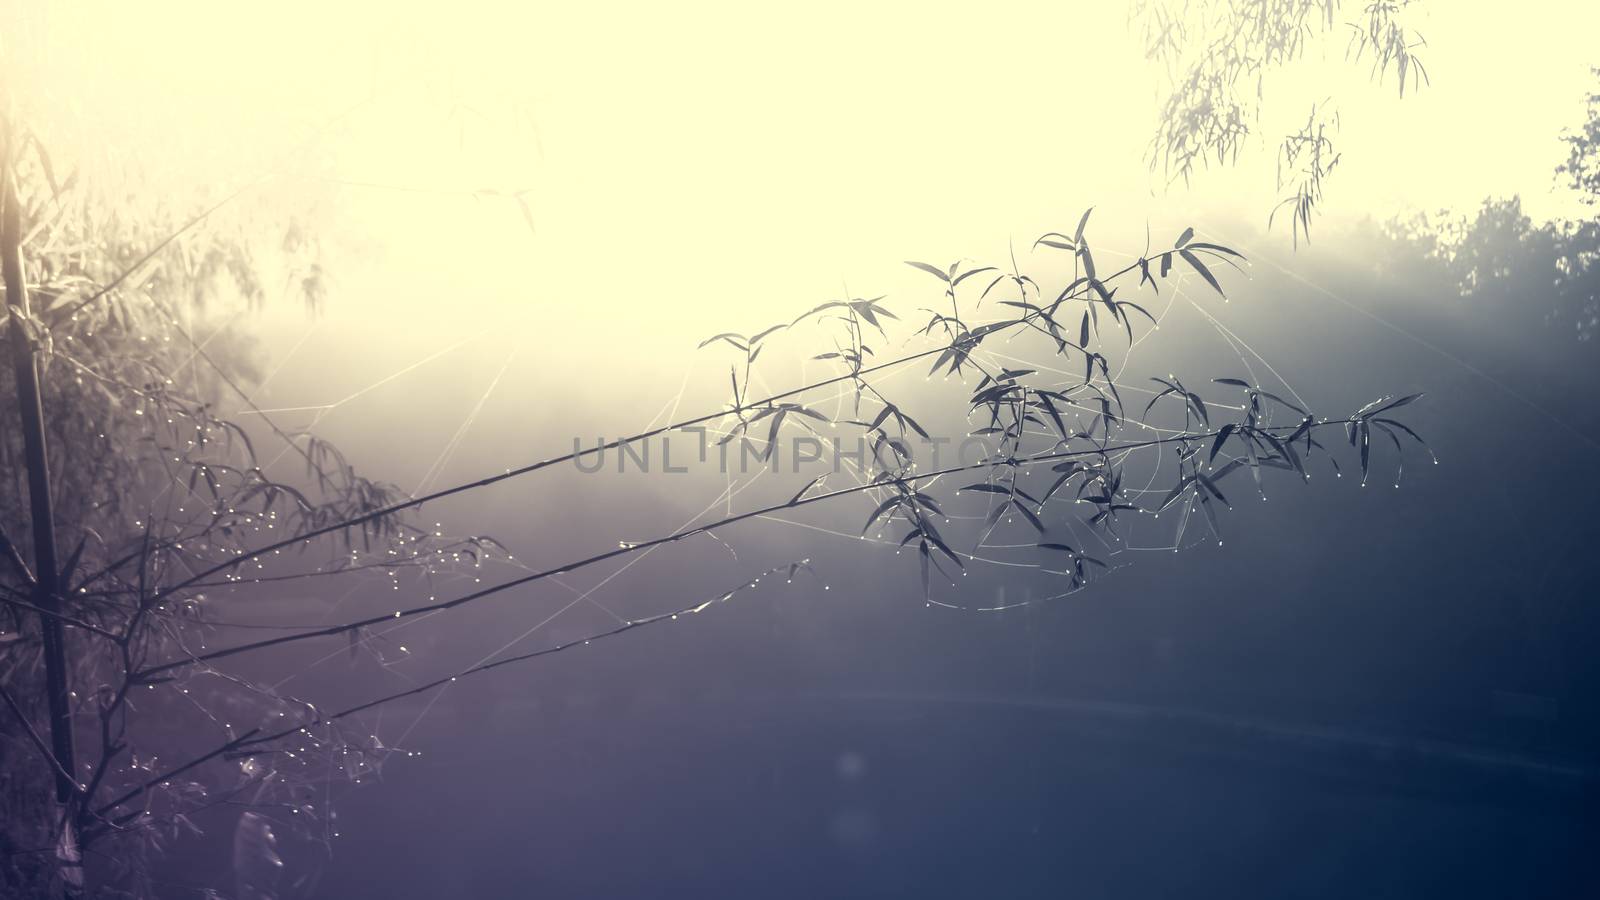 Bamboo and water drops on spider web among the mountains and mist